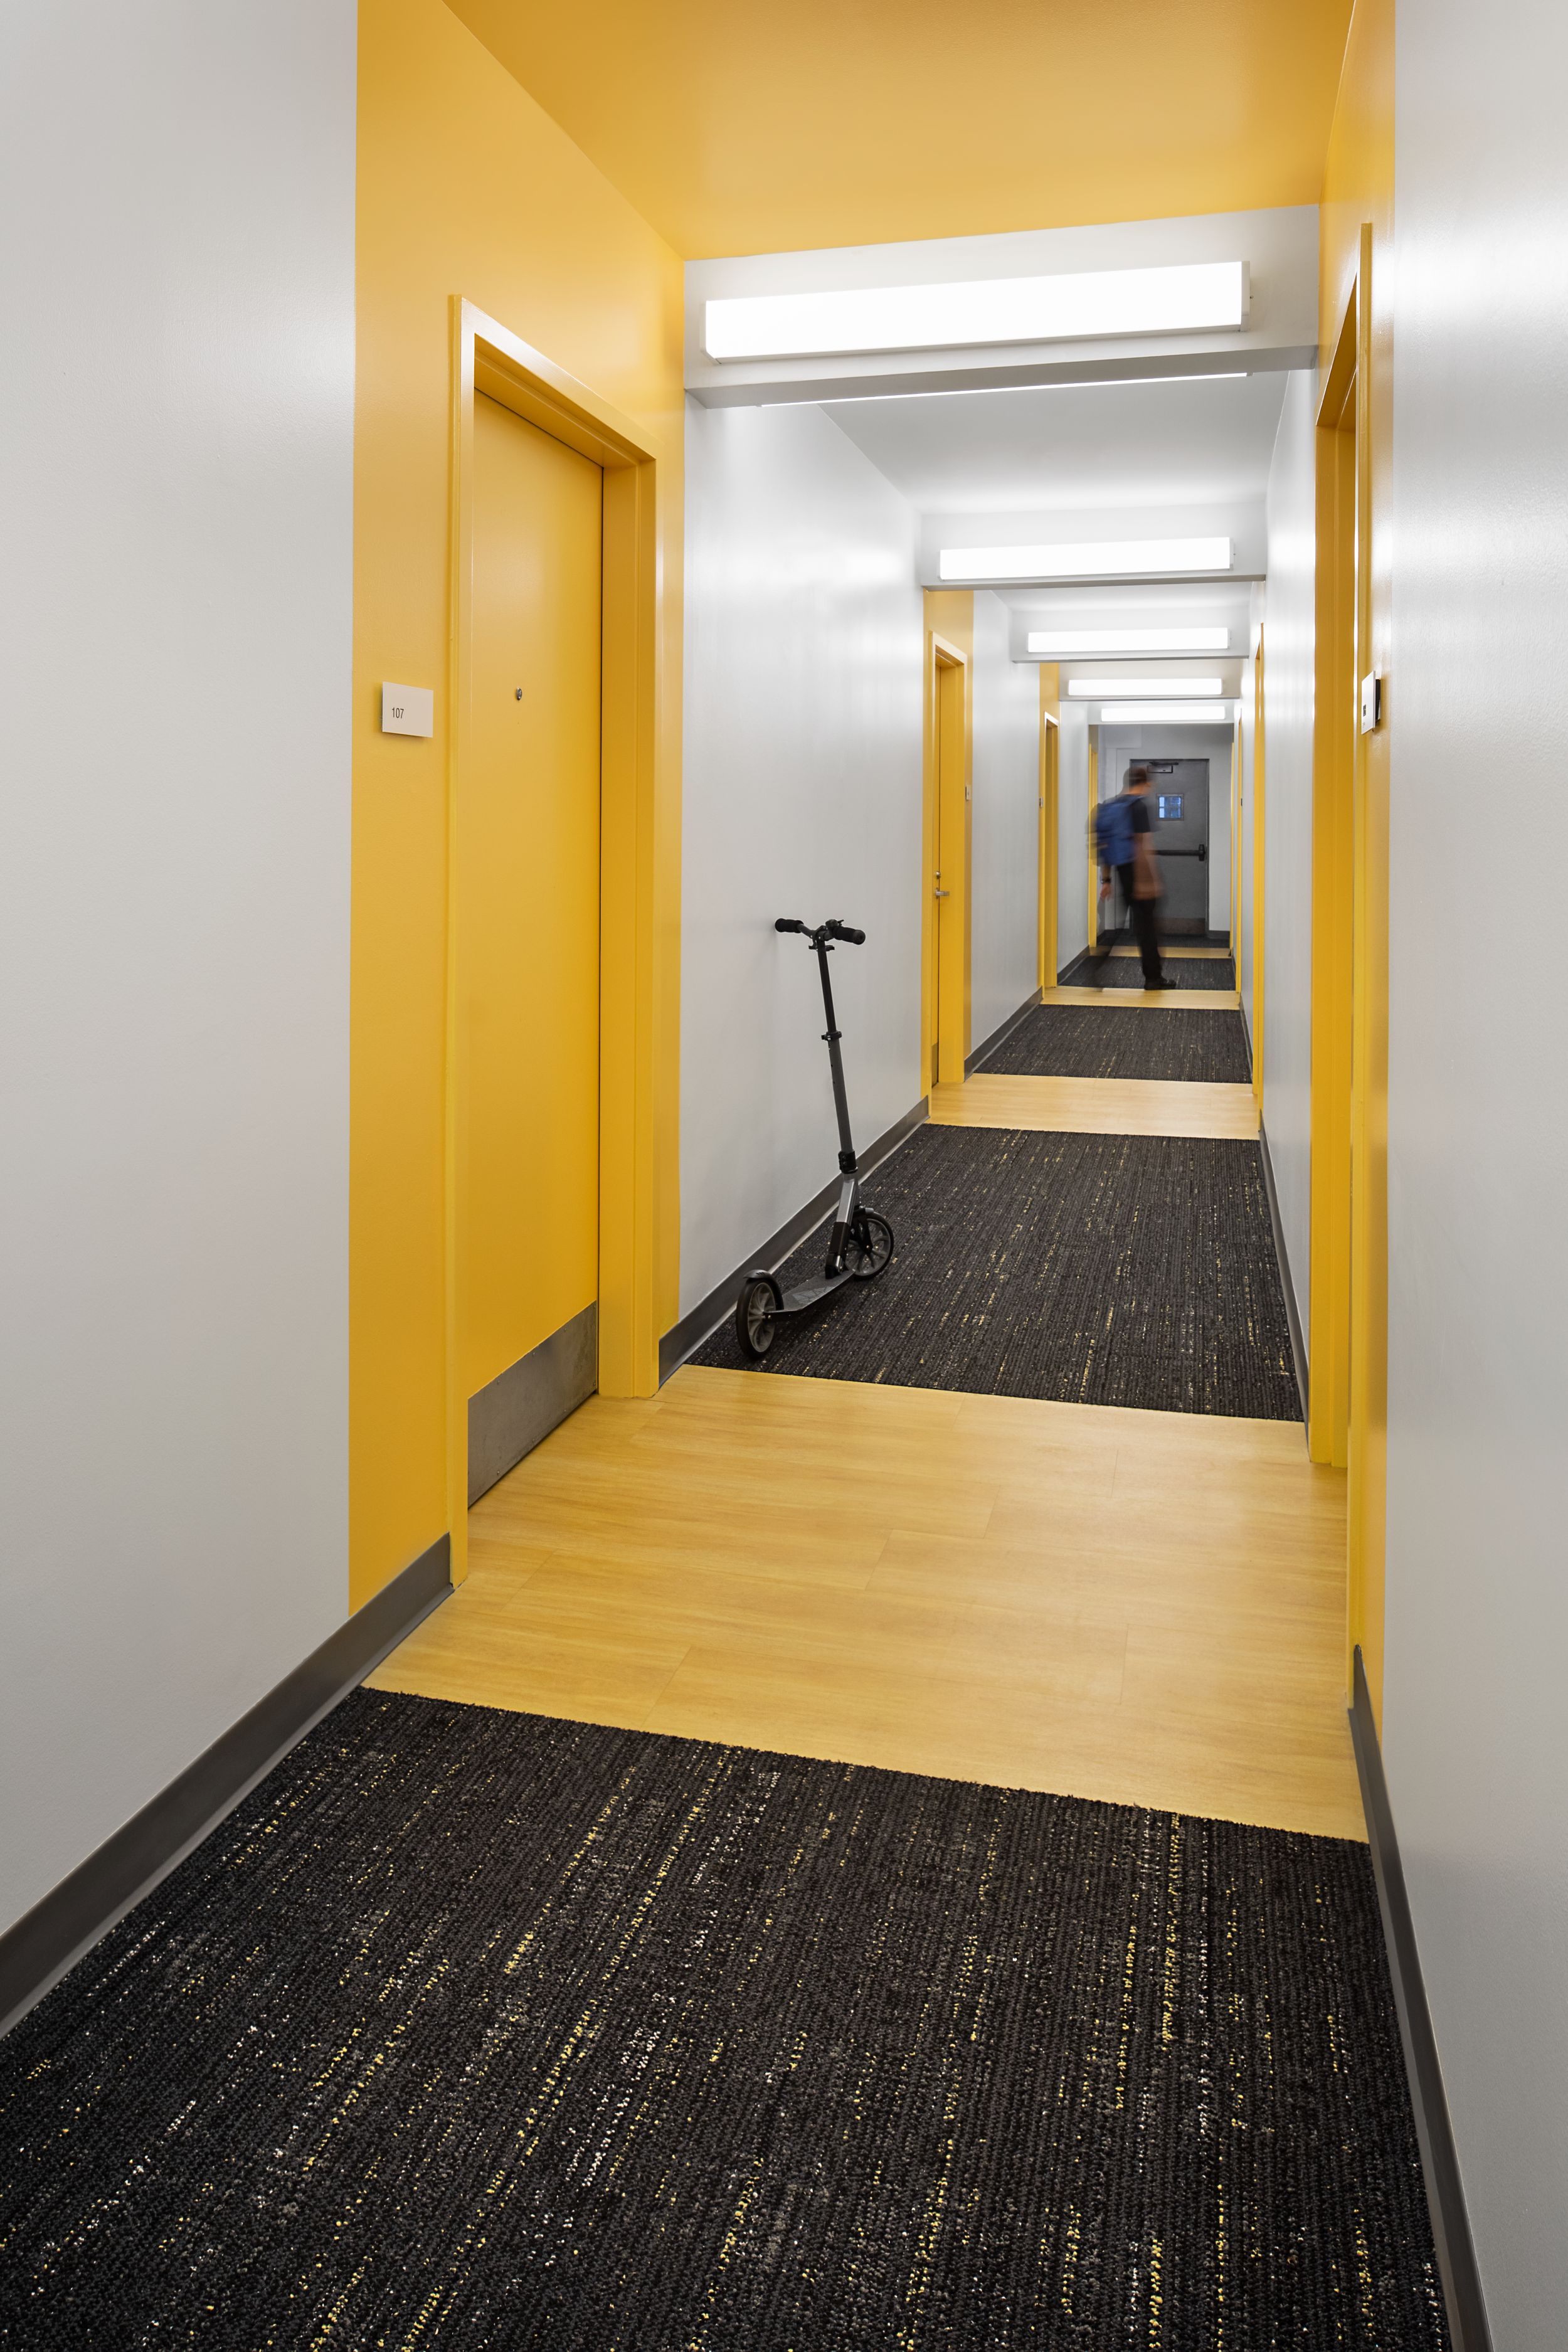 Interface Bitrate plank carpet tile and LVT in residence hall corridor imagen número 6